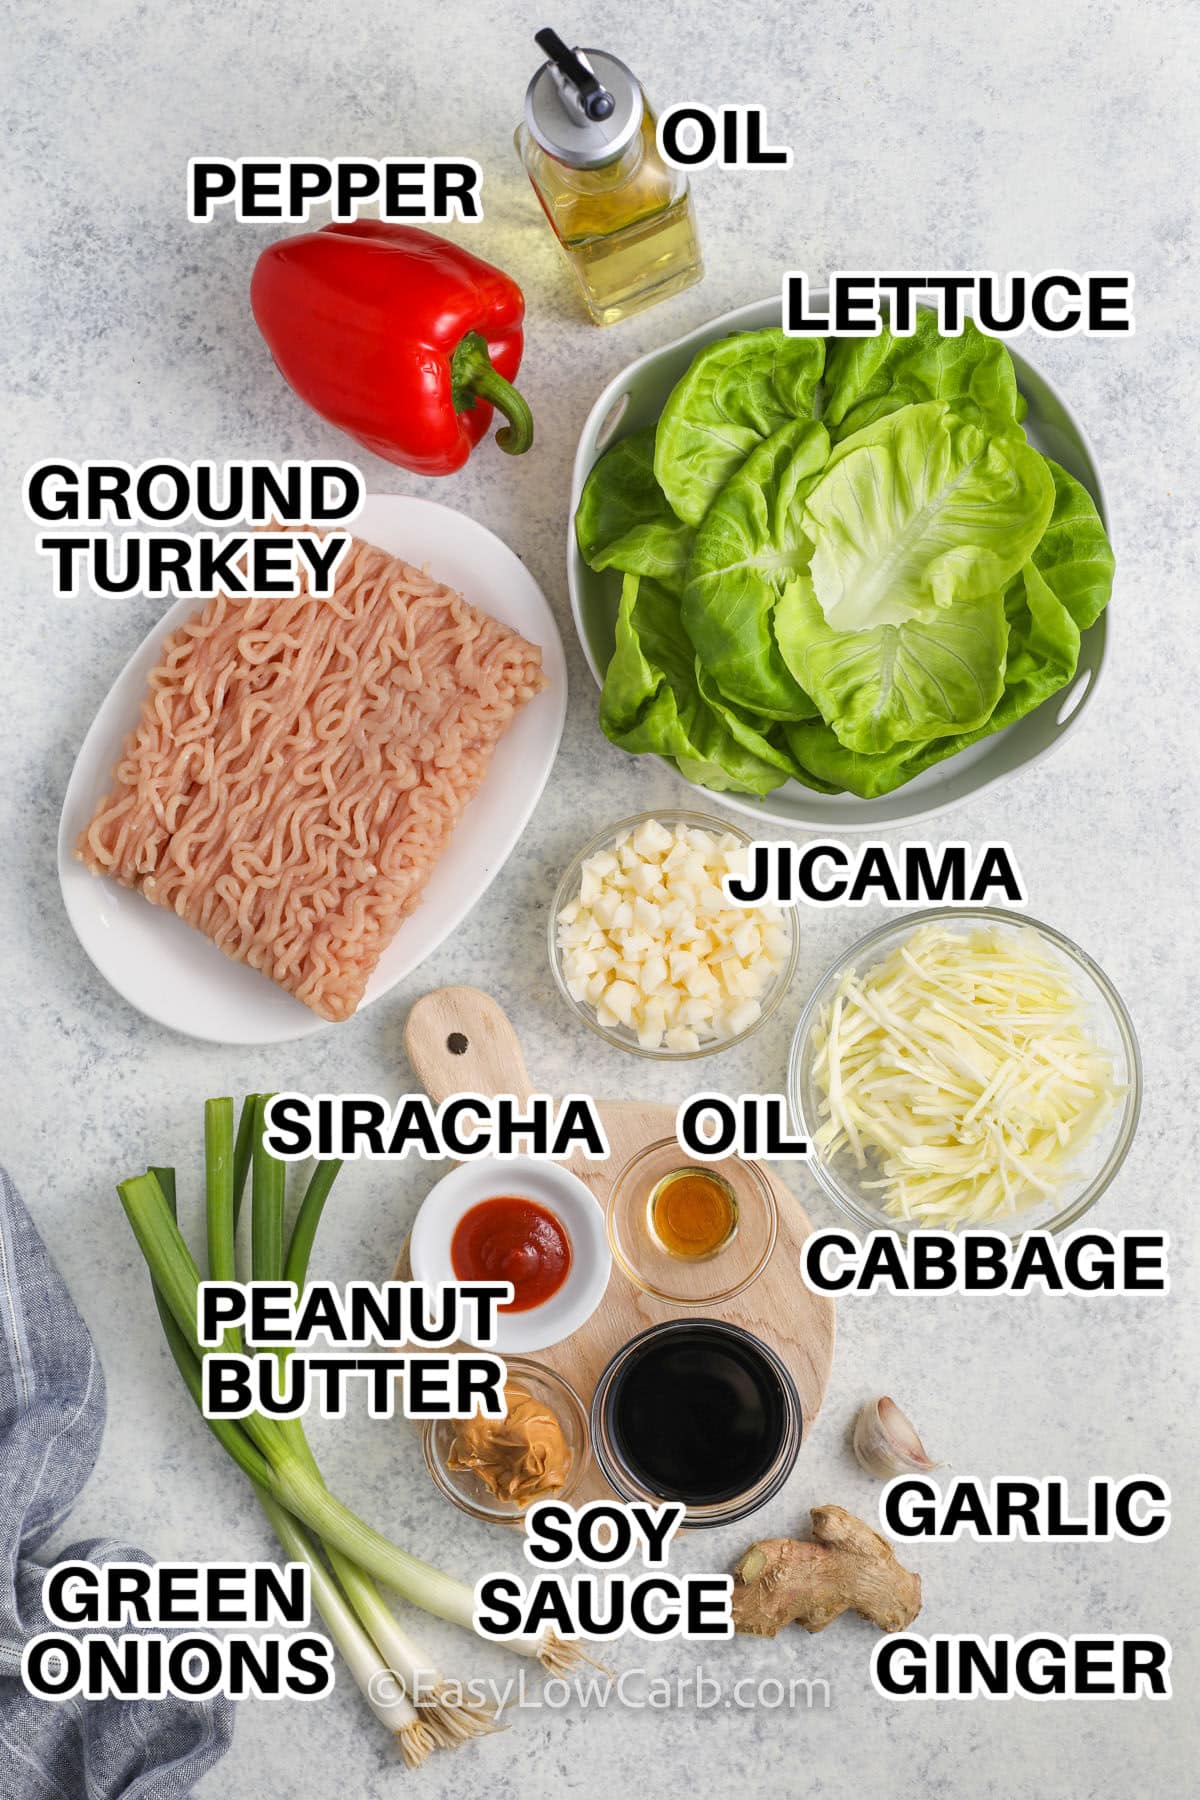 oil , pepper , ground turkey , lettuce , jicama , cabbage , oil , sriracha , peanut butter , soy sauce , garlic , ginger , green onions with labels to make Turkey Lettuce Wraps